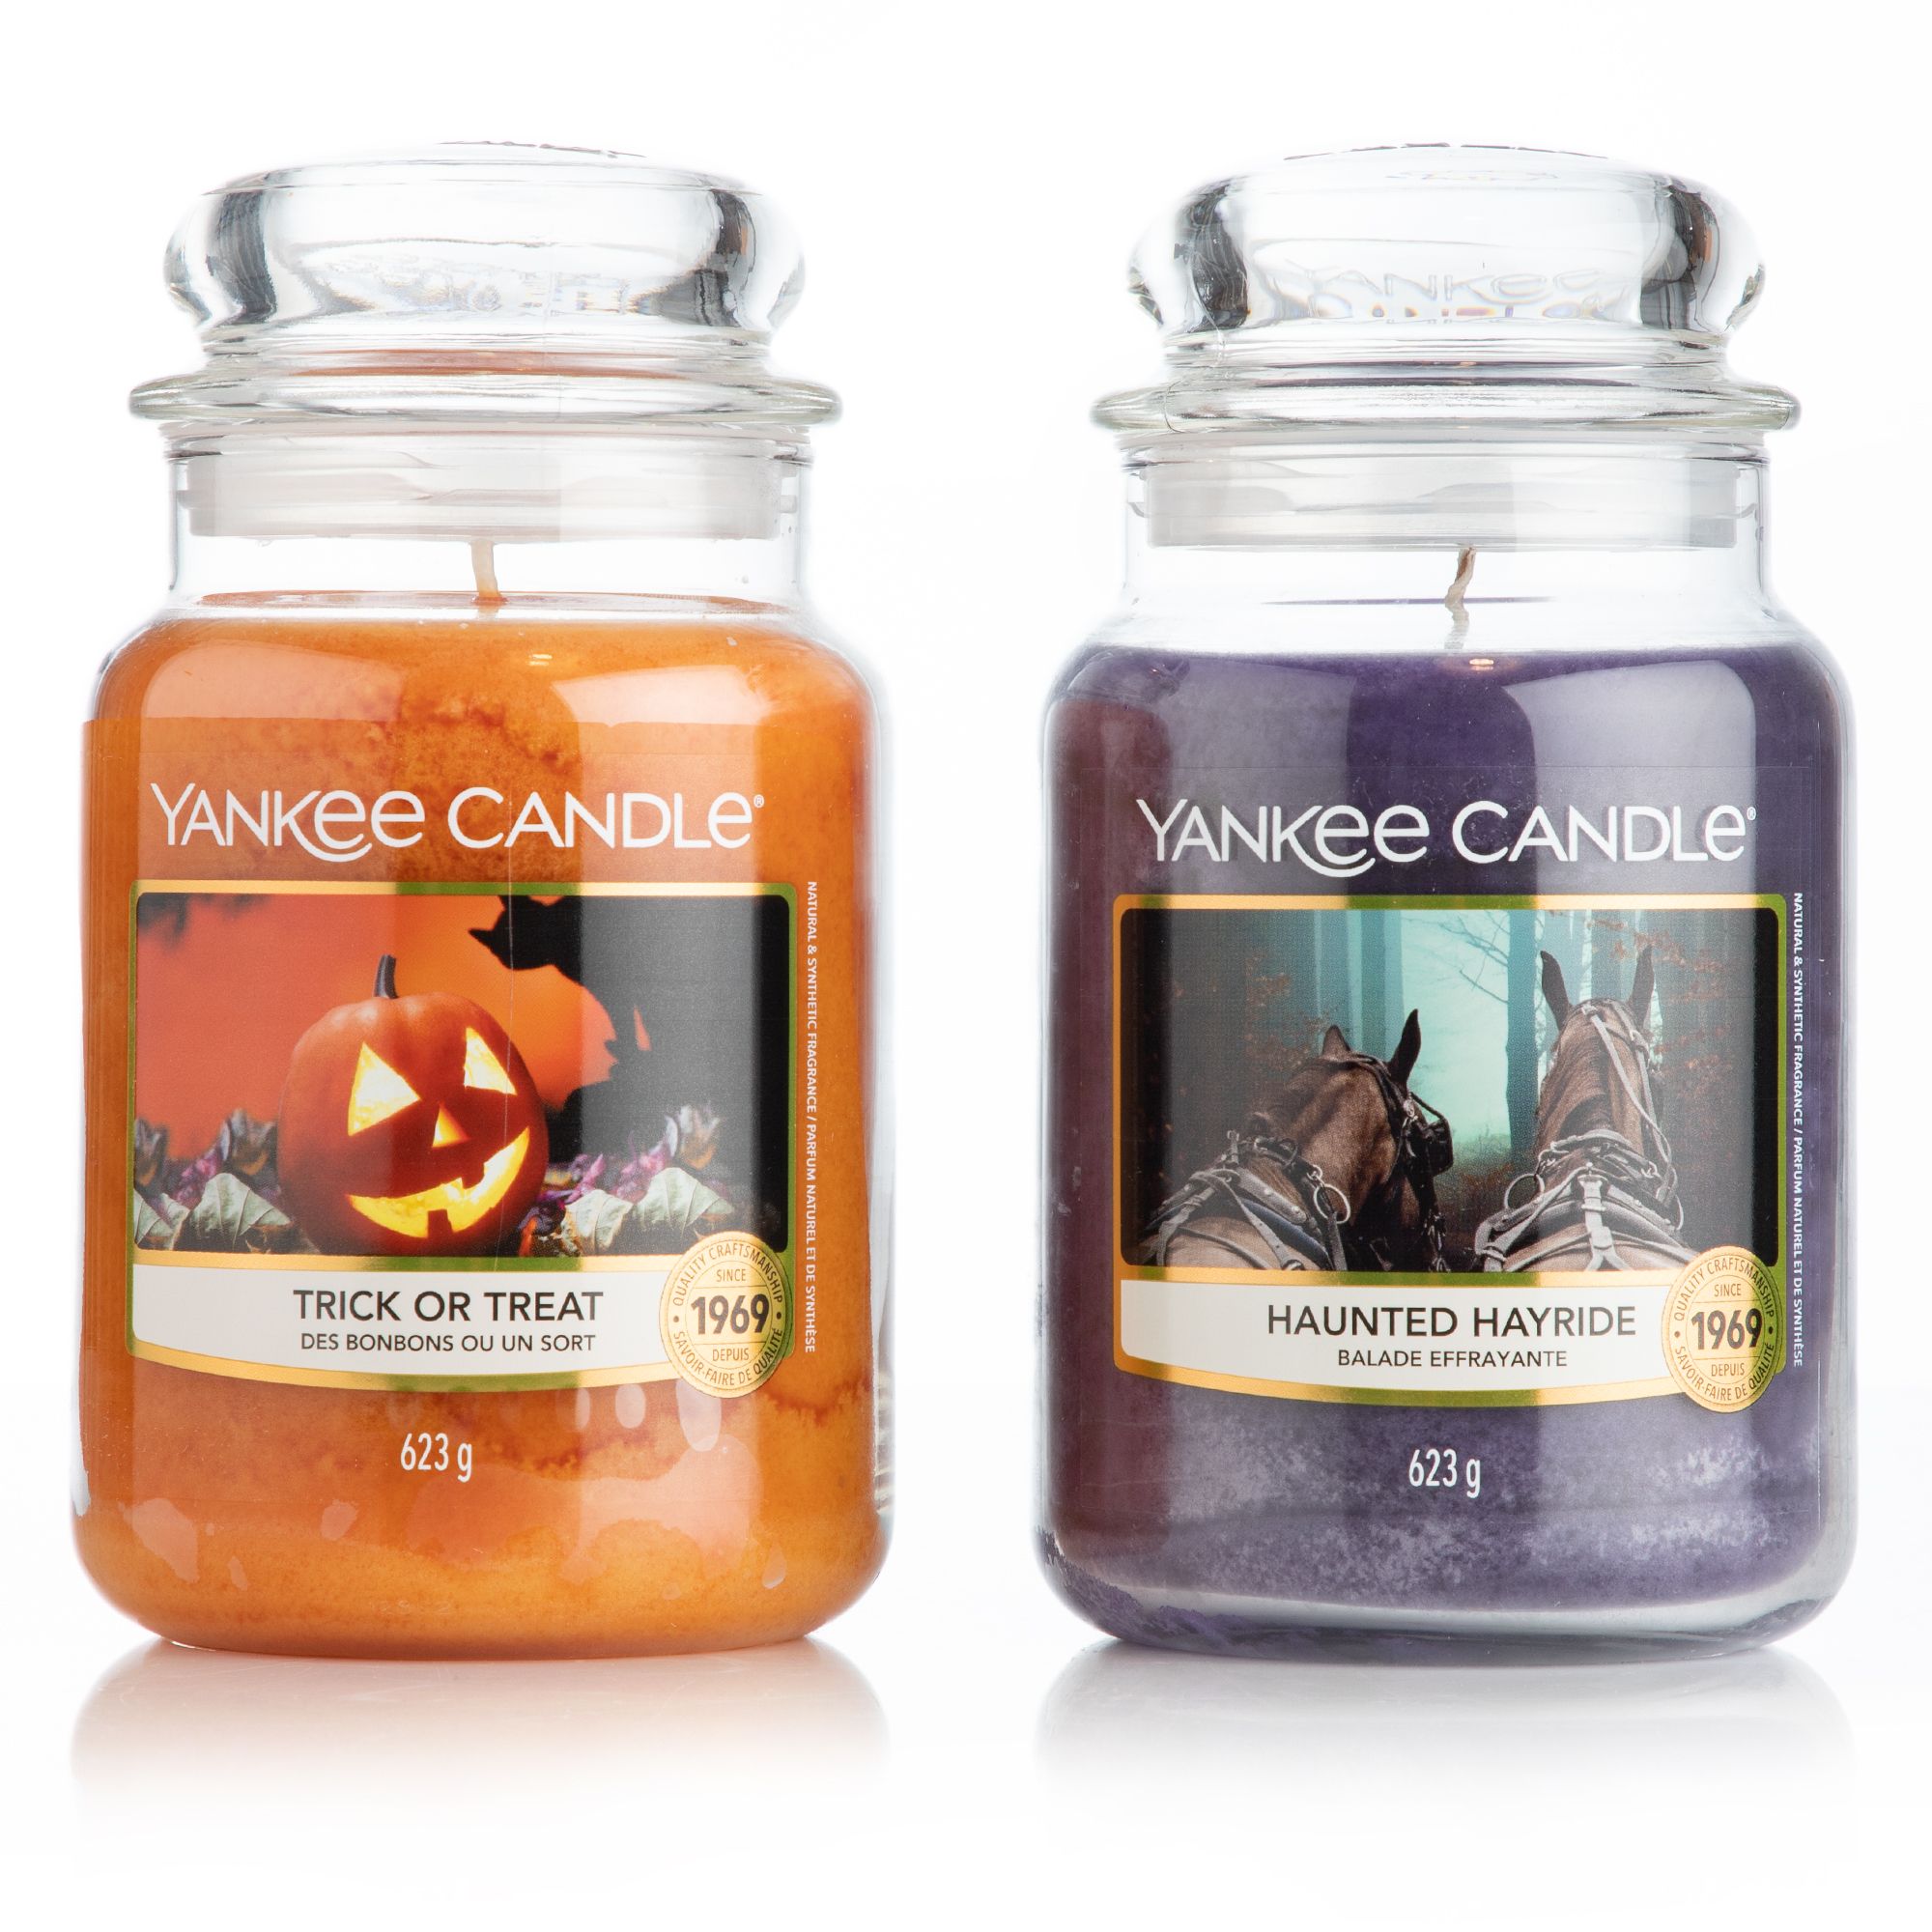 YANKEE CANDLE® Halloween Special limitierte Edition 2 Large Jars je